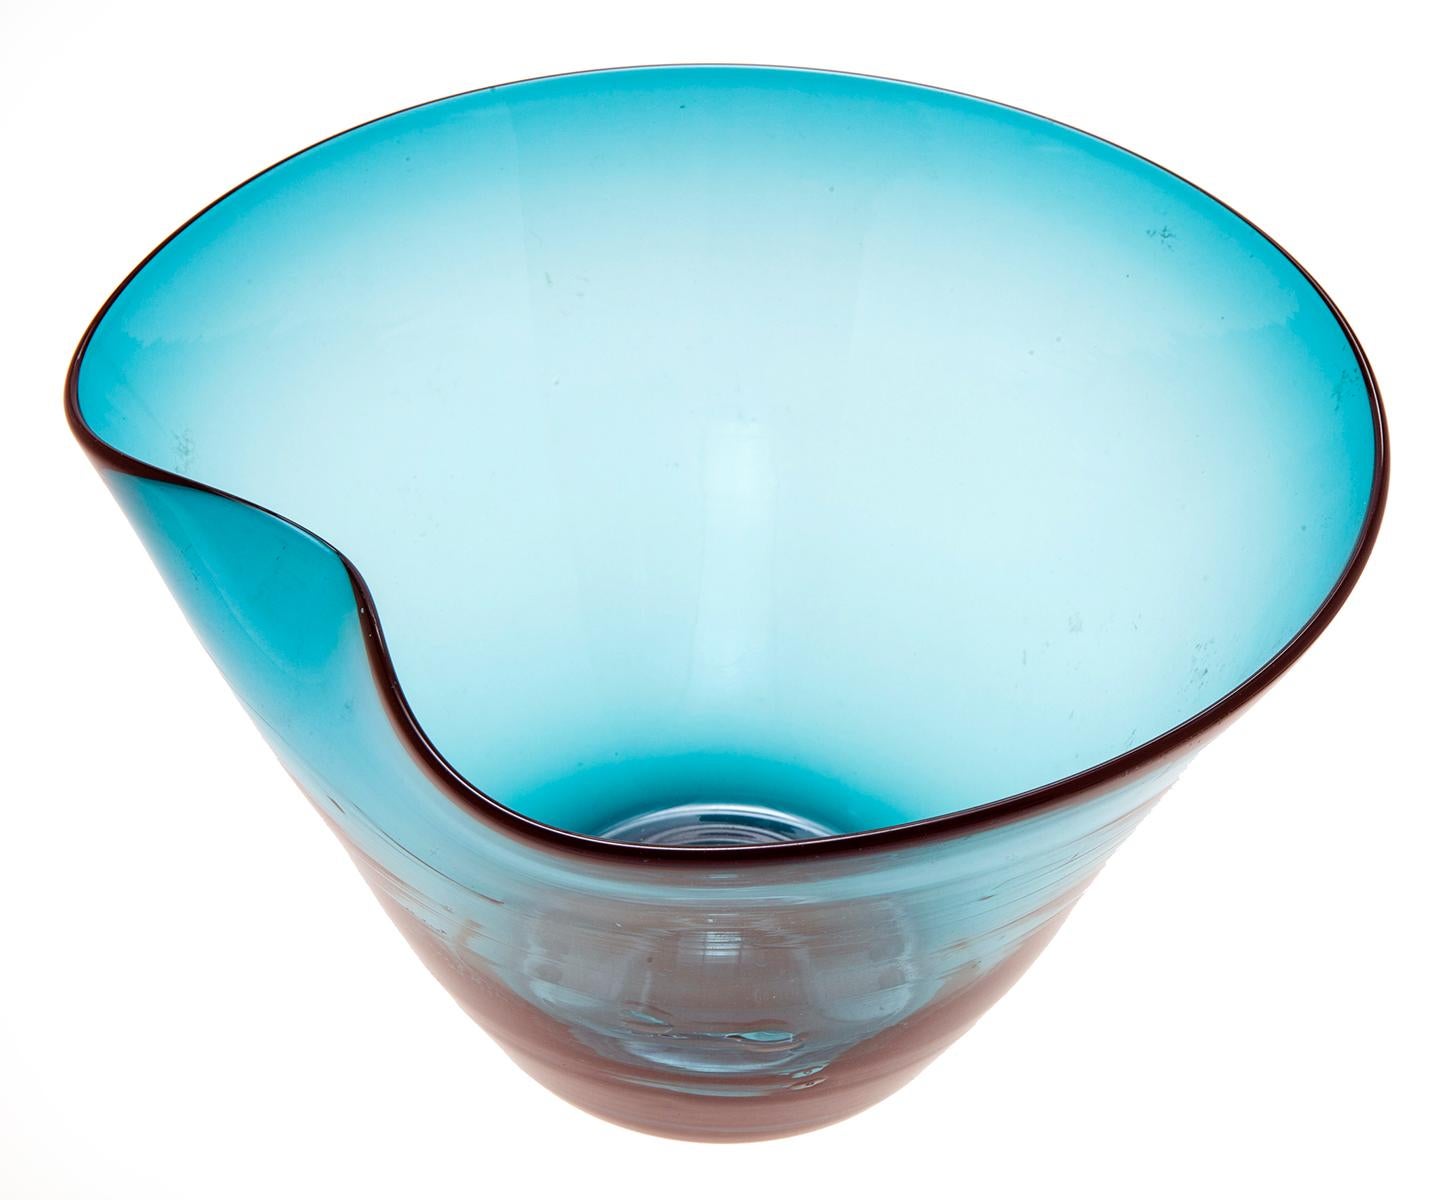 Delightful & colorful aqua bowl with a quirky 